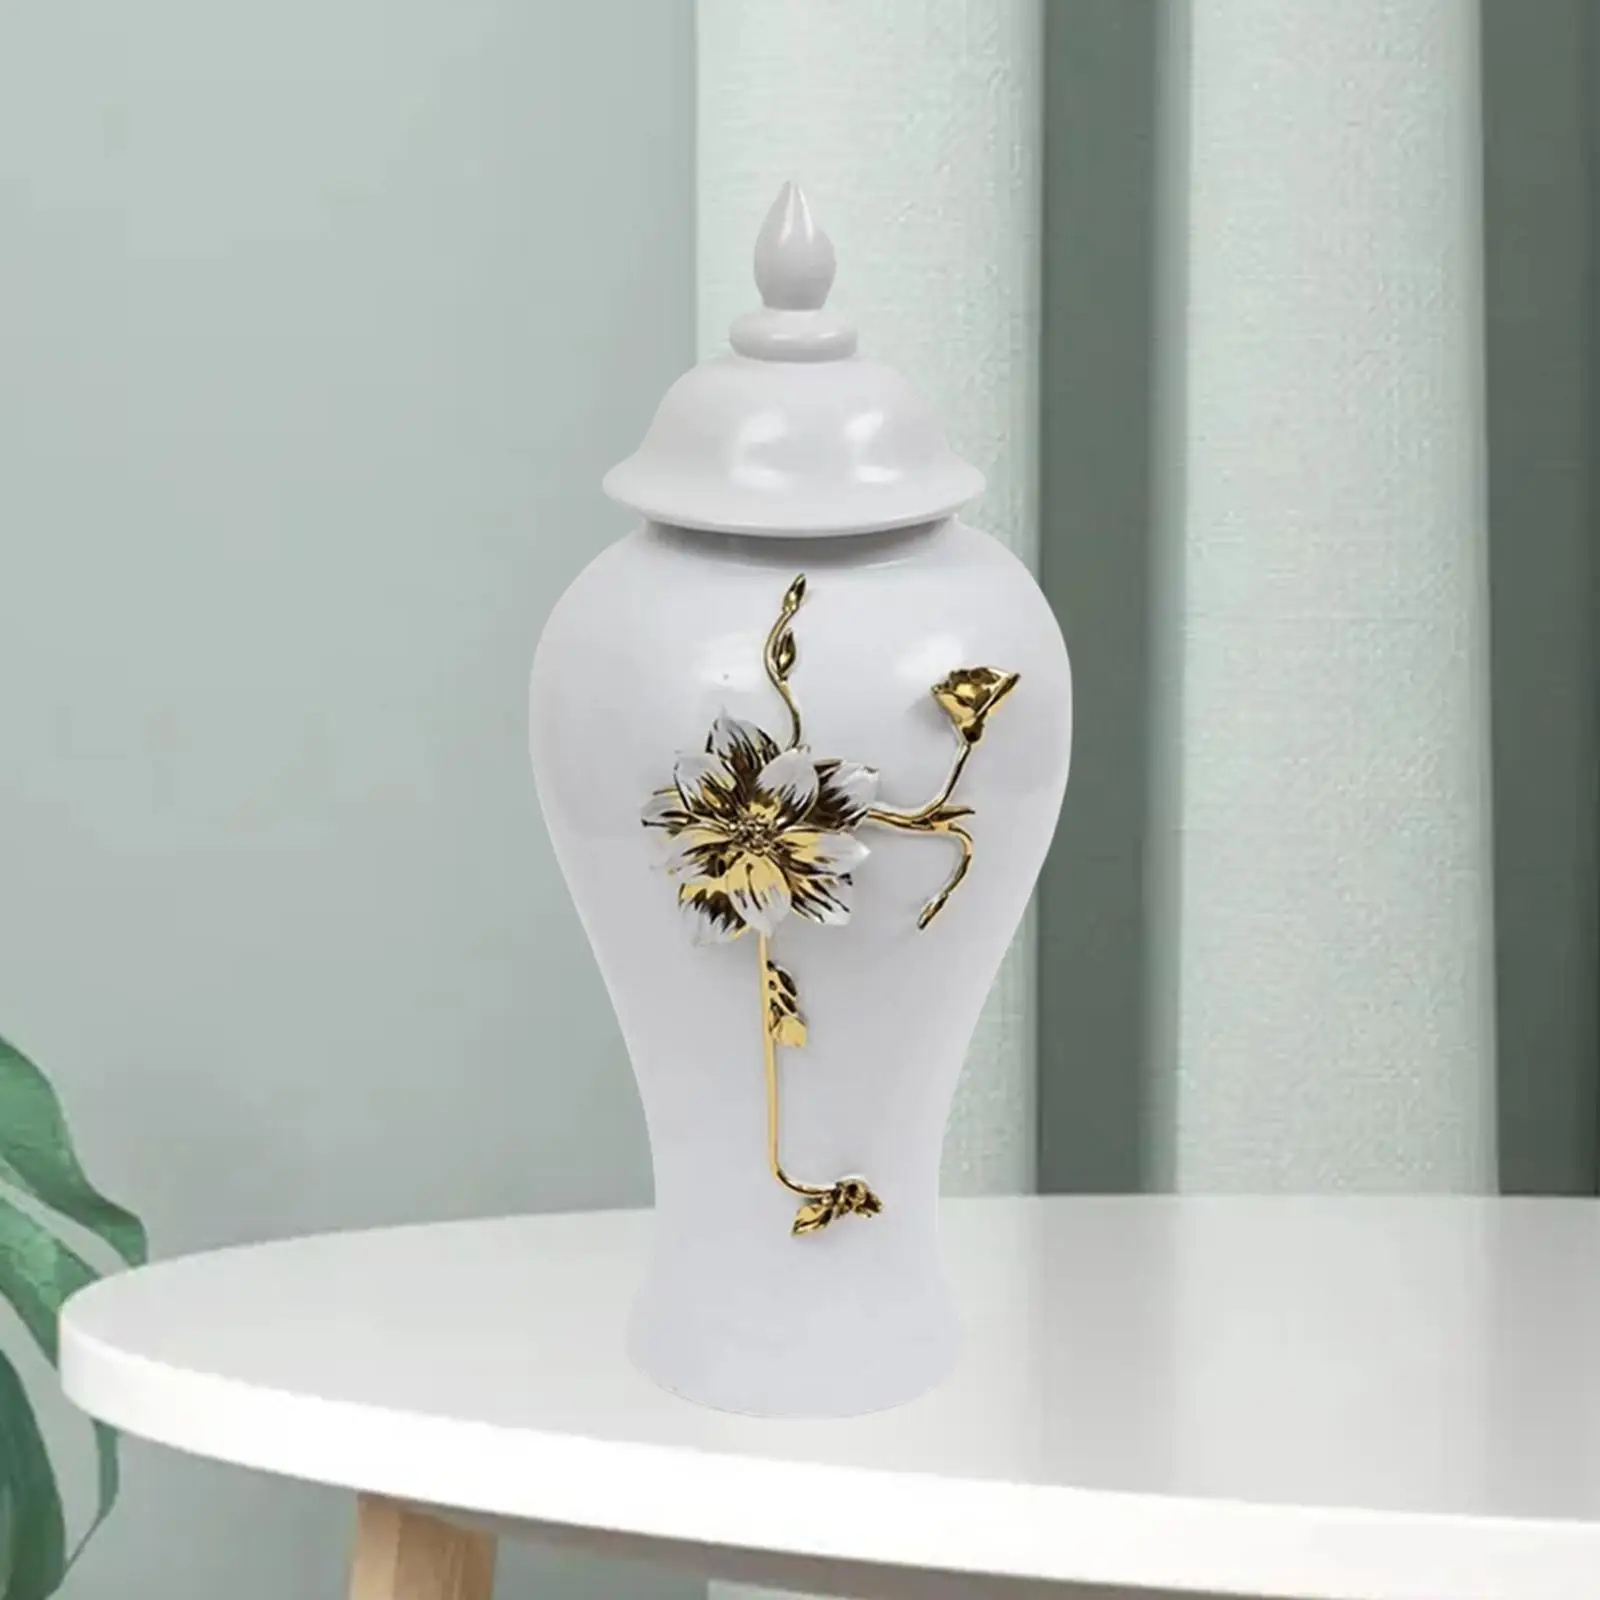 Ceramic Vase with Lid Decorative Accessories Chinese White and Aureate Ginger Jar Storage Jar for Floral Desk Home Office Party